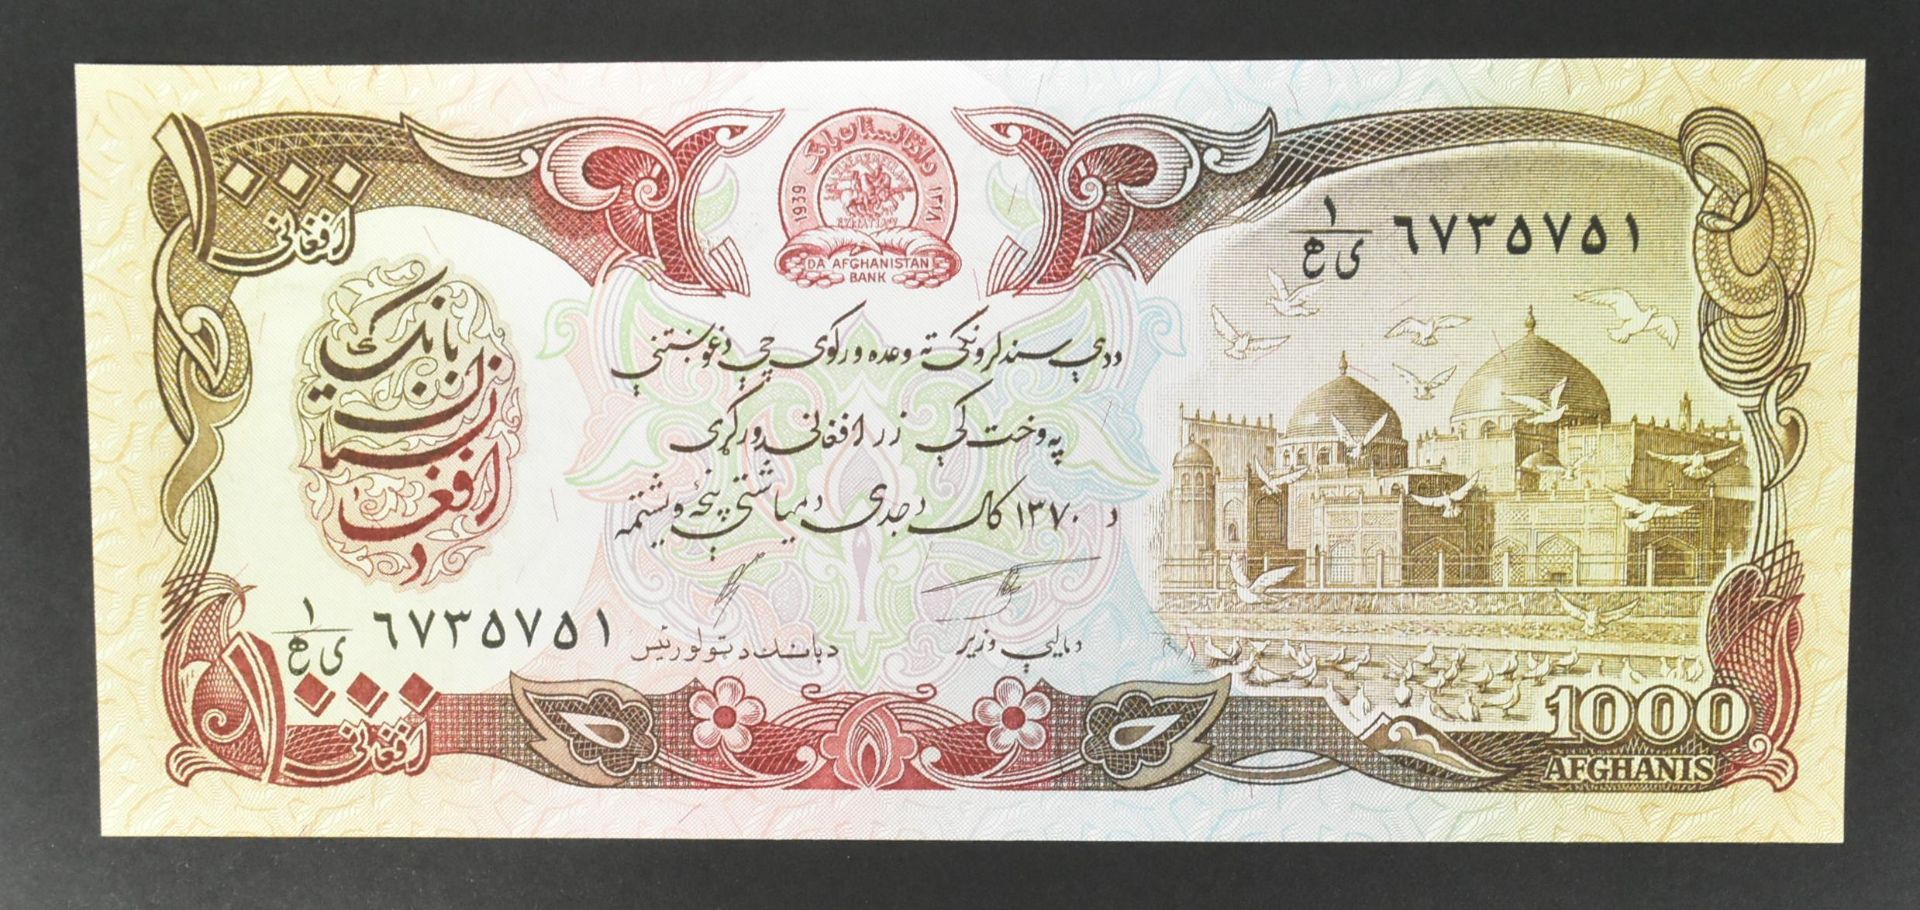 COLLECTION OF INTERNATIONAL UNCIRCULATED BANK NOTES - OMAN - Image 31 of 51